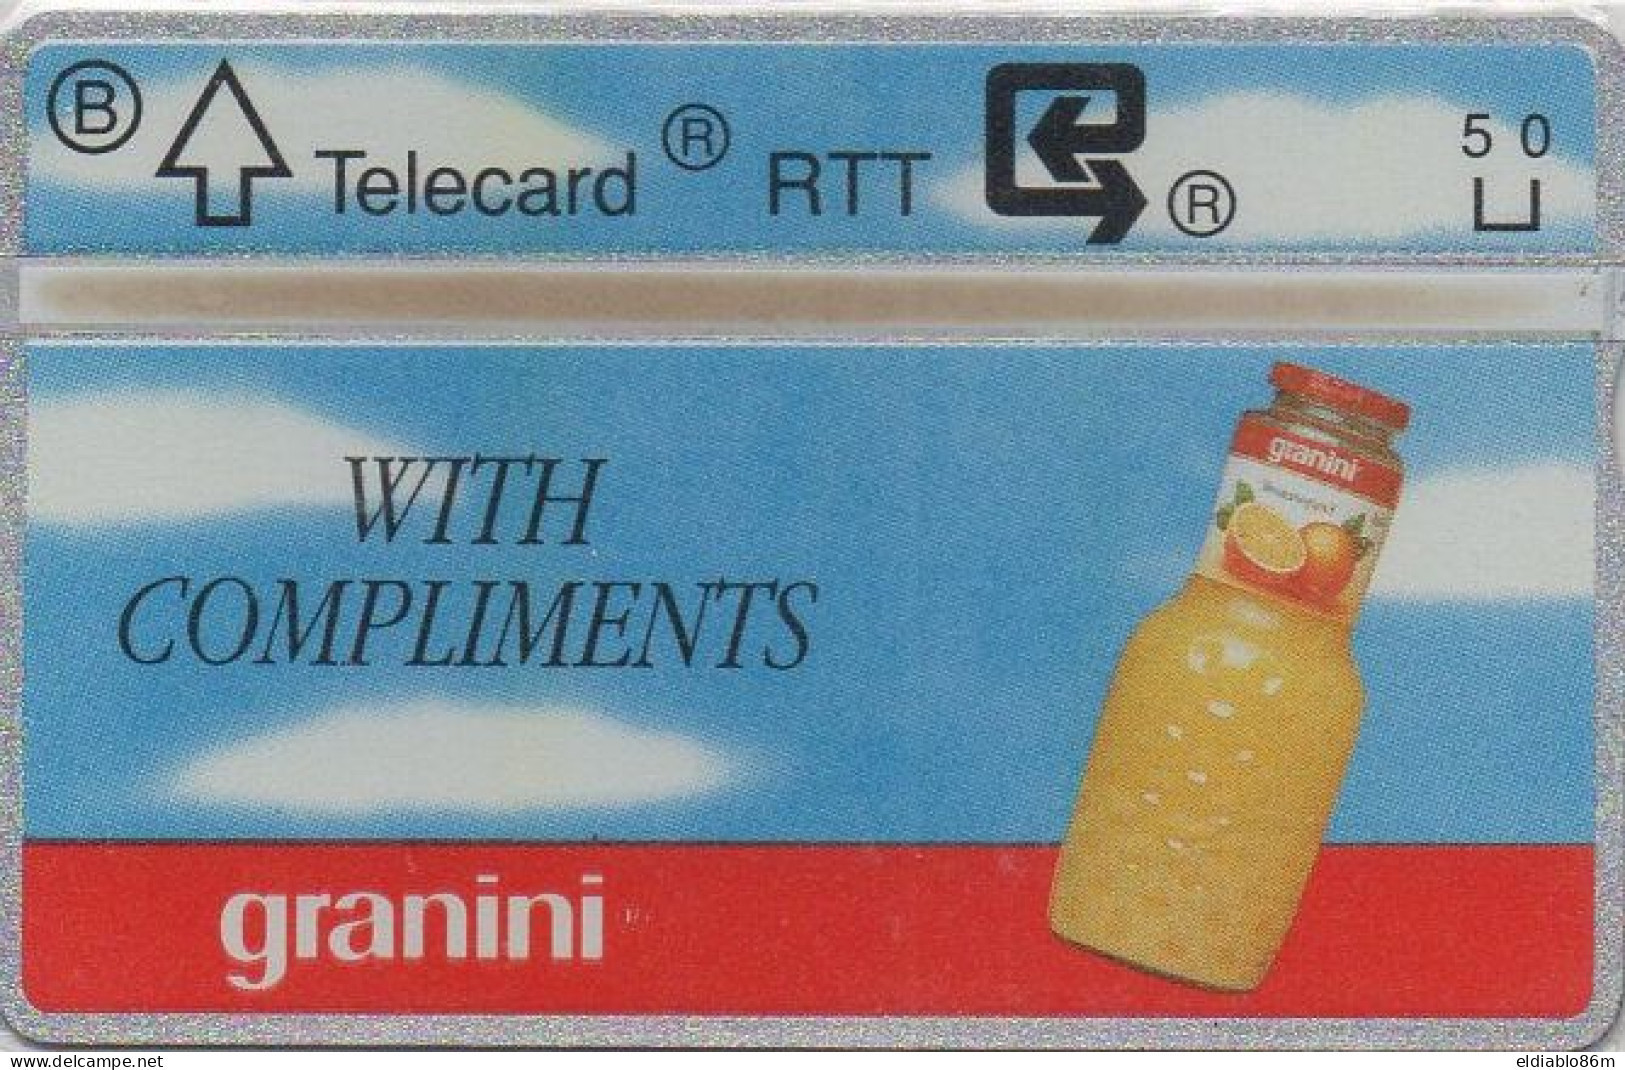 BELGIUM - L&G - P261 - GRANINI - WITH COMPLIMENTS - MINT - Ohne Chip